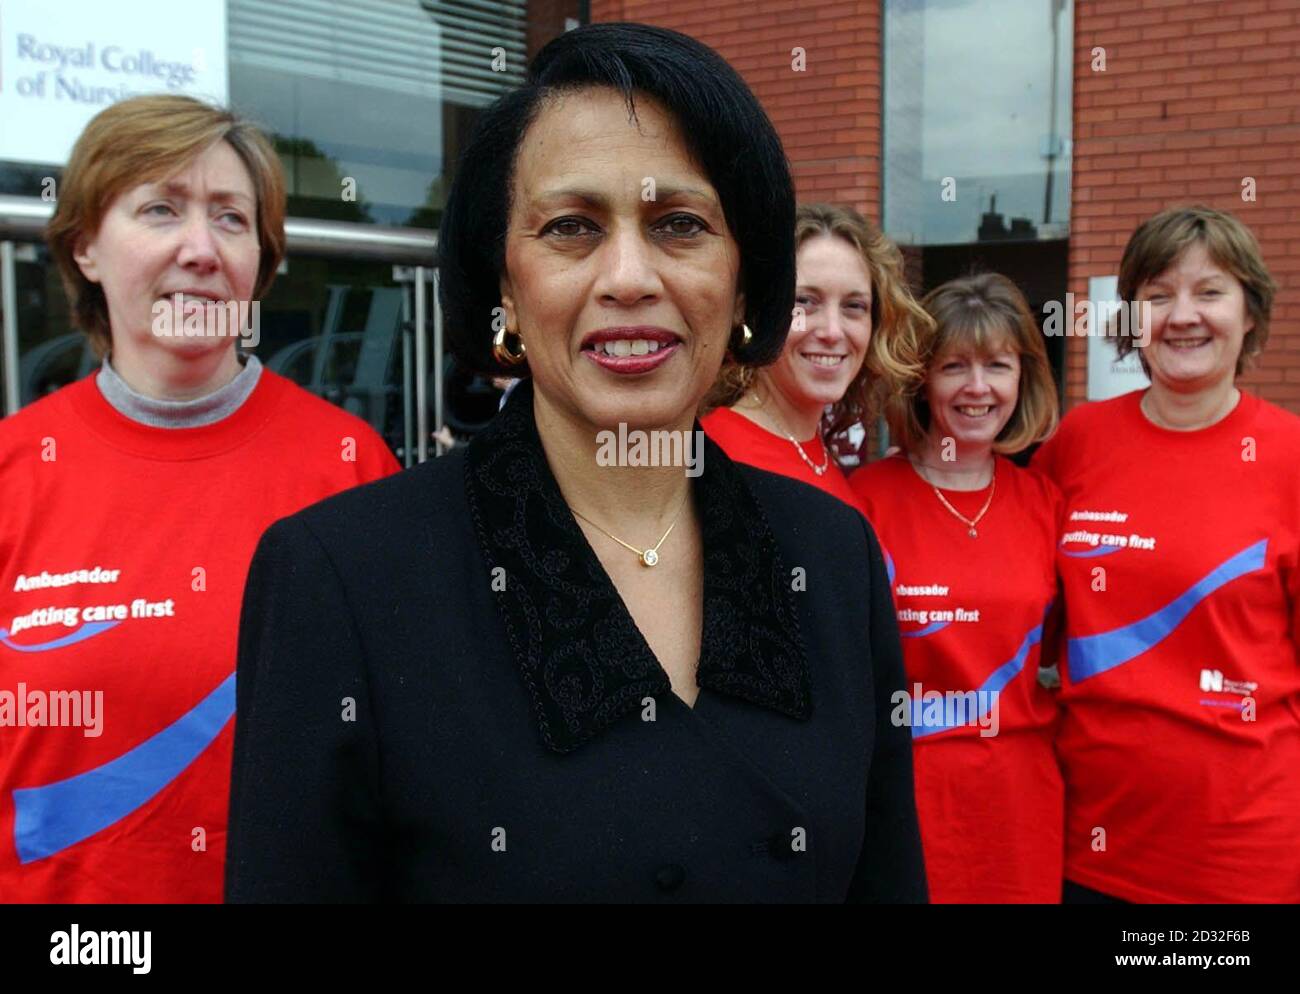 Dr. Beverley Malone the General Secretary of the Royal College of Nursing with nurses at the Harrogate Conference Centre, where the RCN Congress 2002 began in the North Yorkshire town. The Conference will be addressed by Health Secretary Alan Milburn on Wednesday. Stock Photo